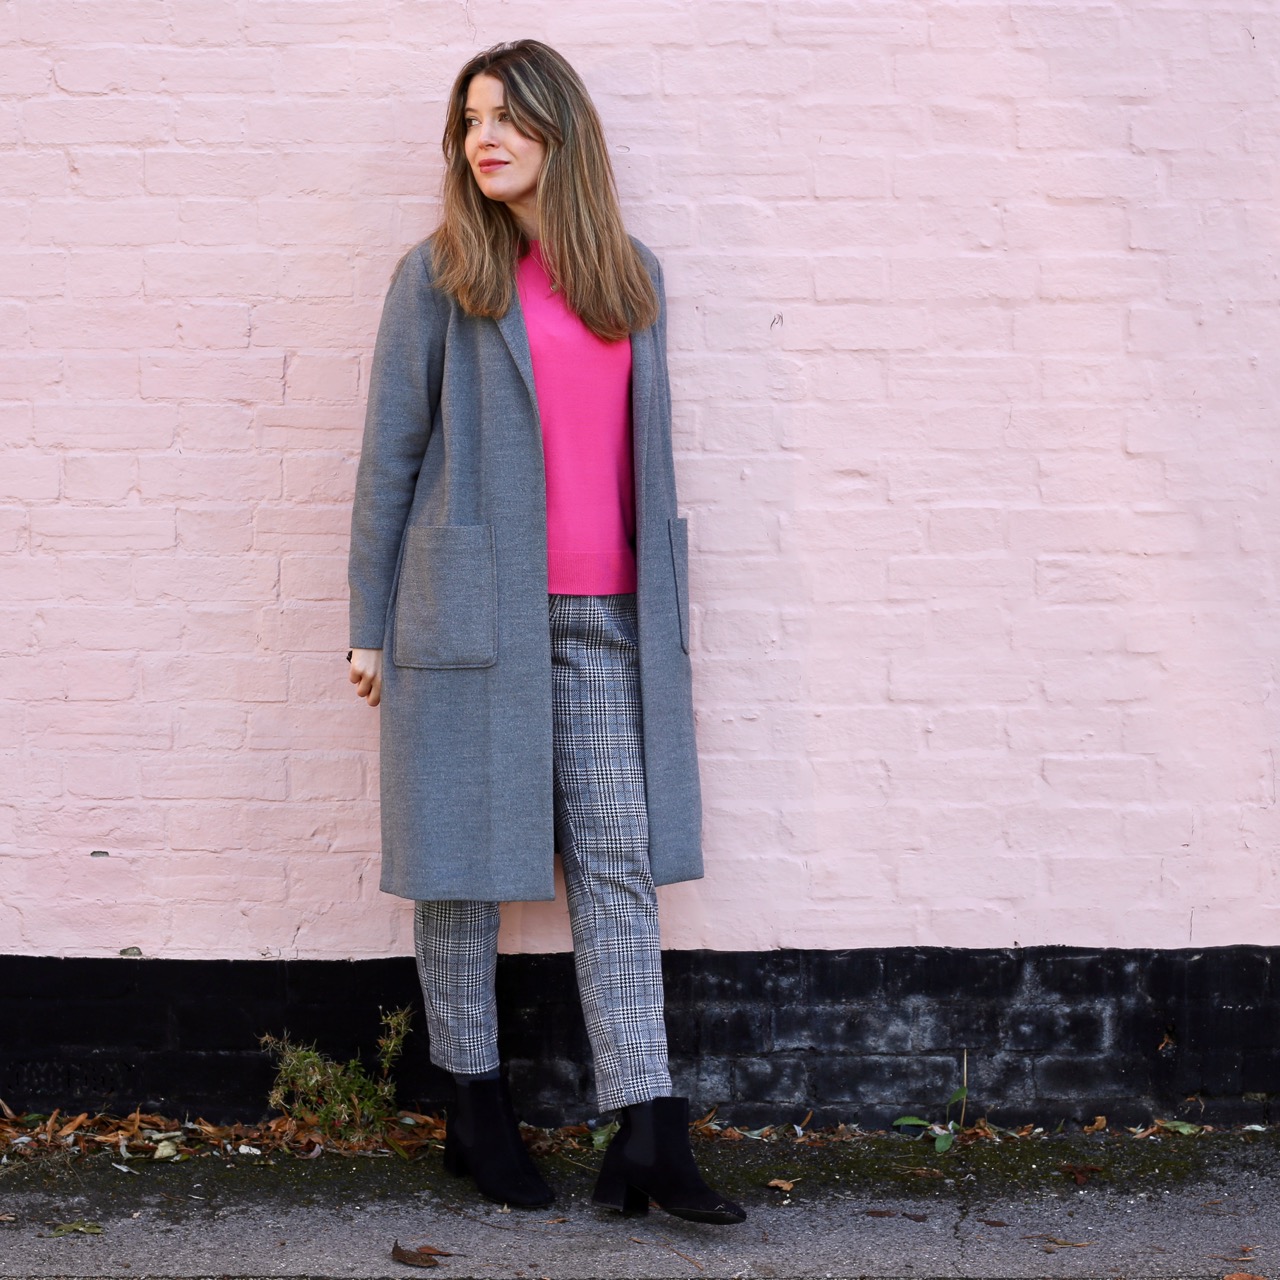 Pink jumper and grey trousers